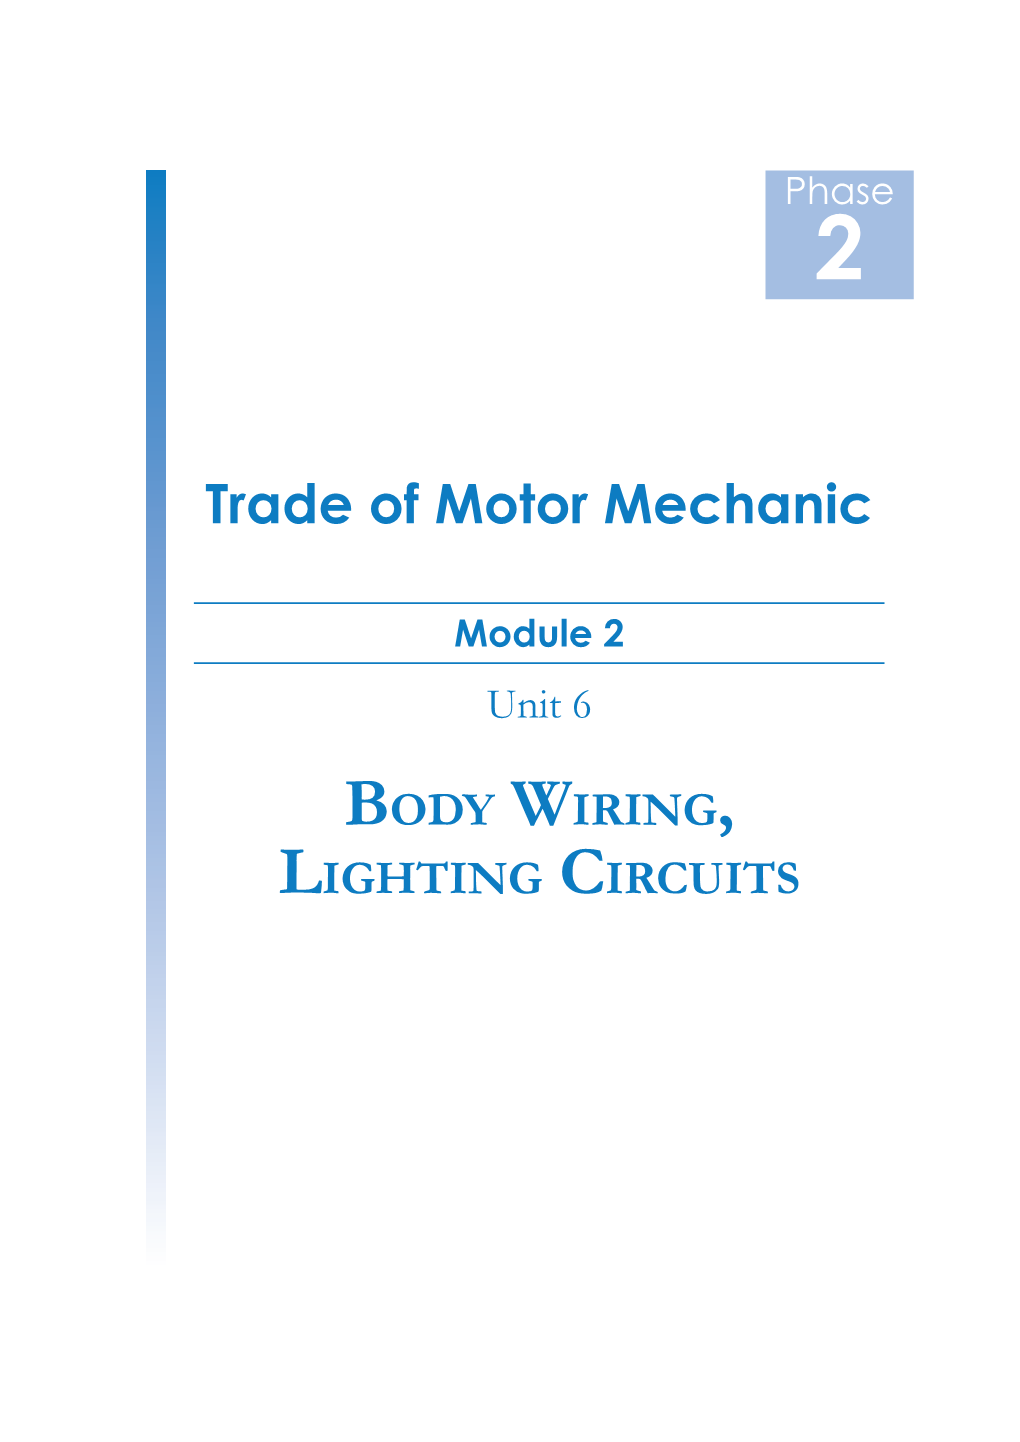 Body Wiring, Lighting Circuits Produced By